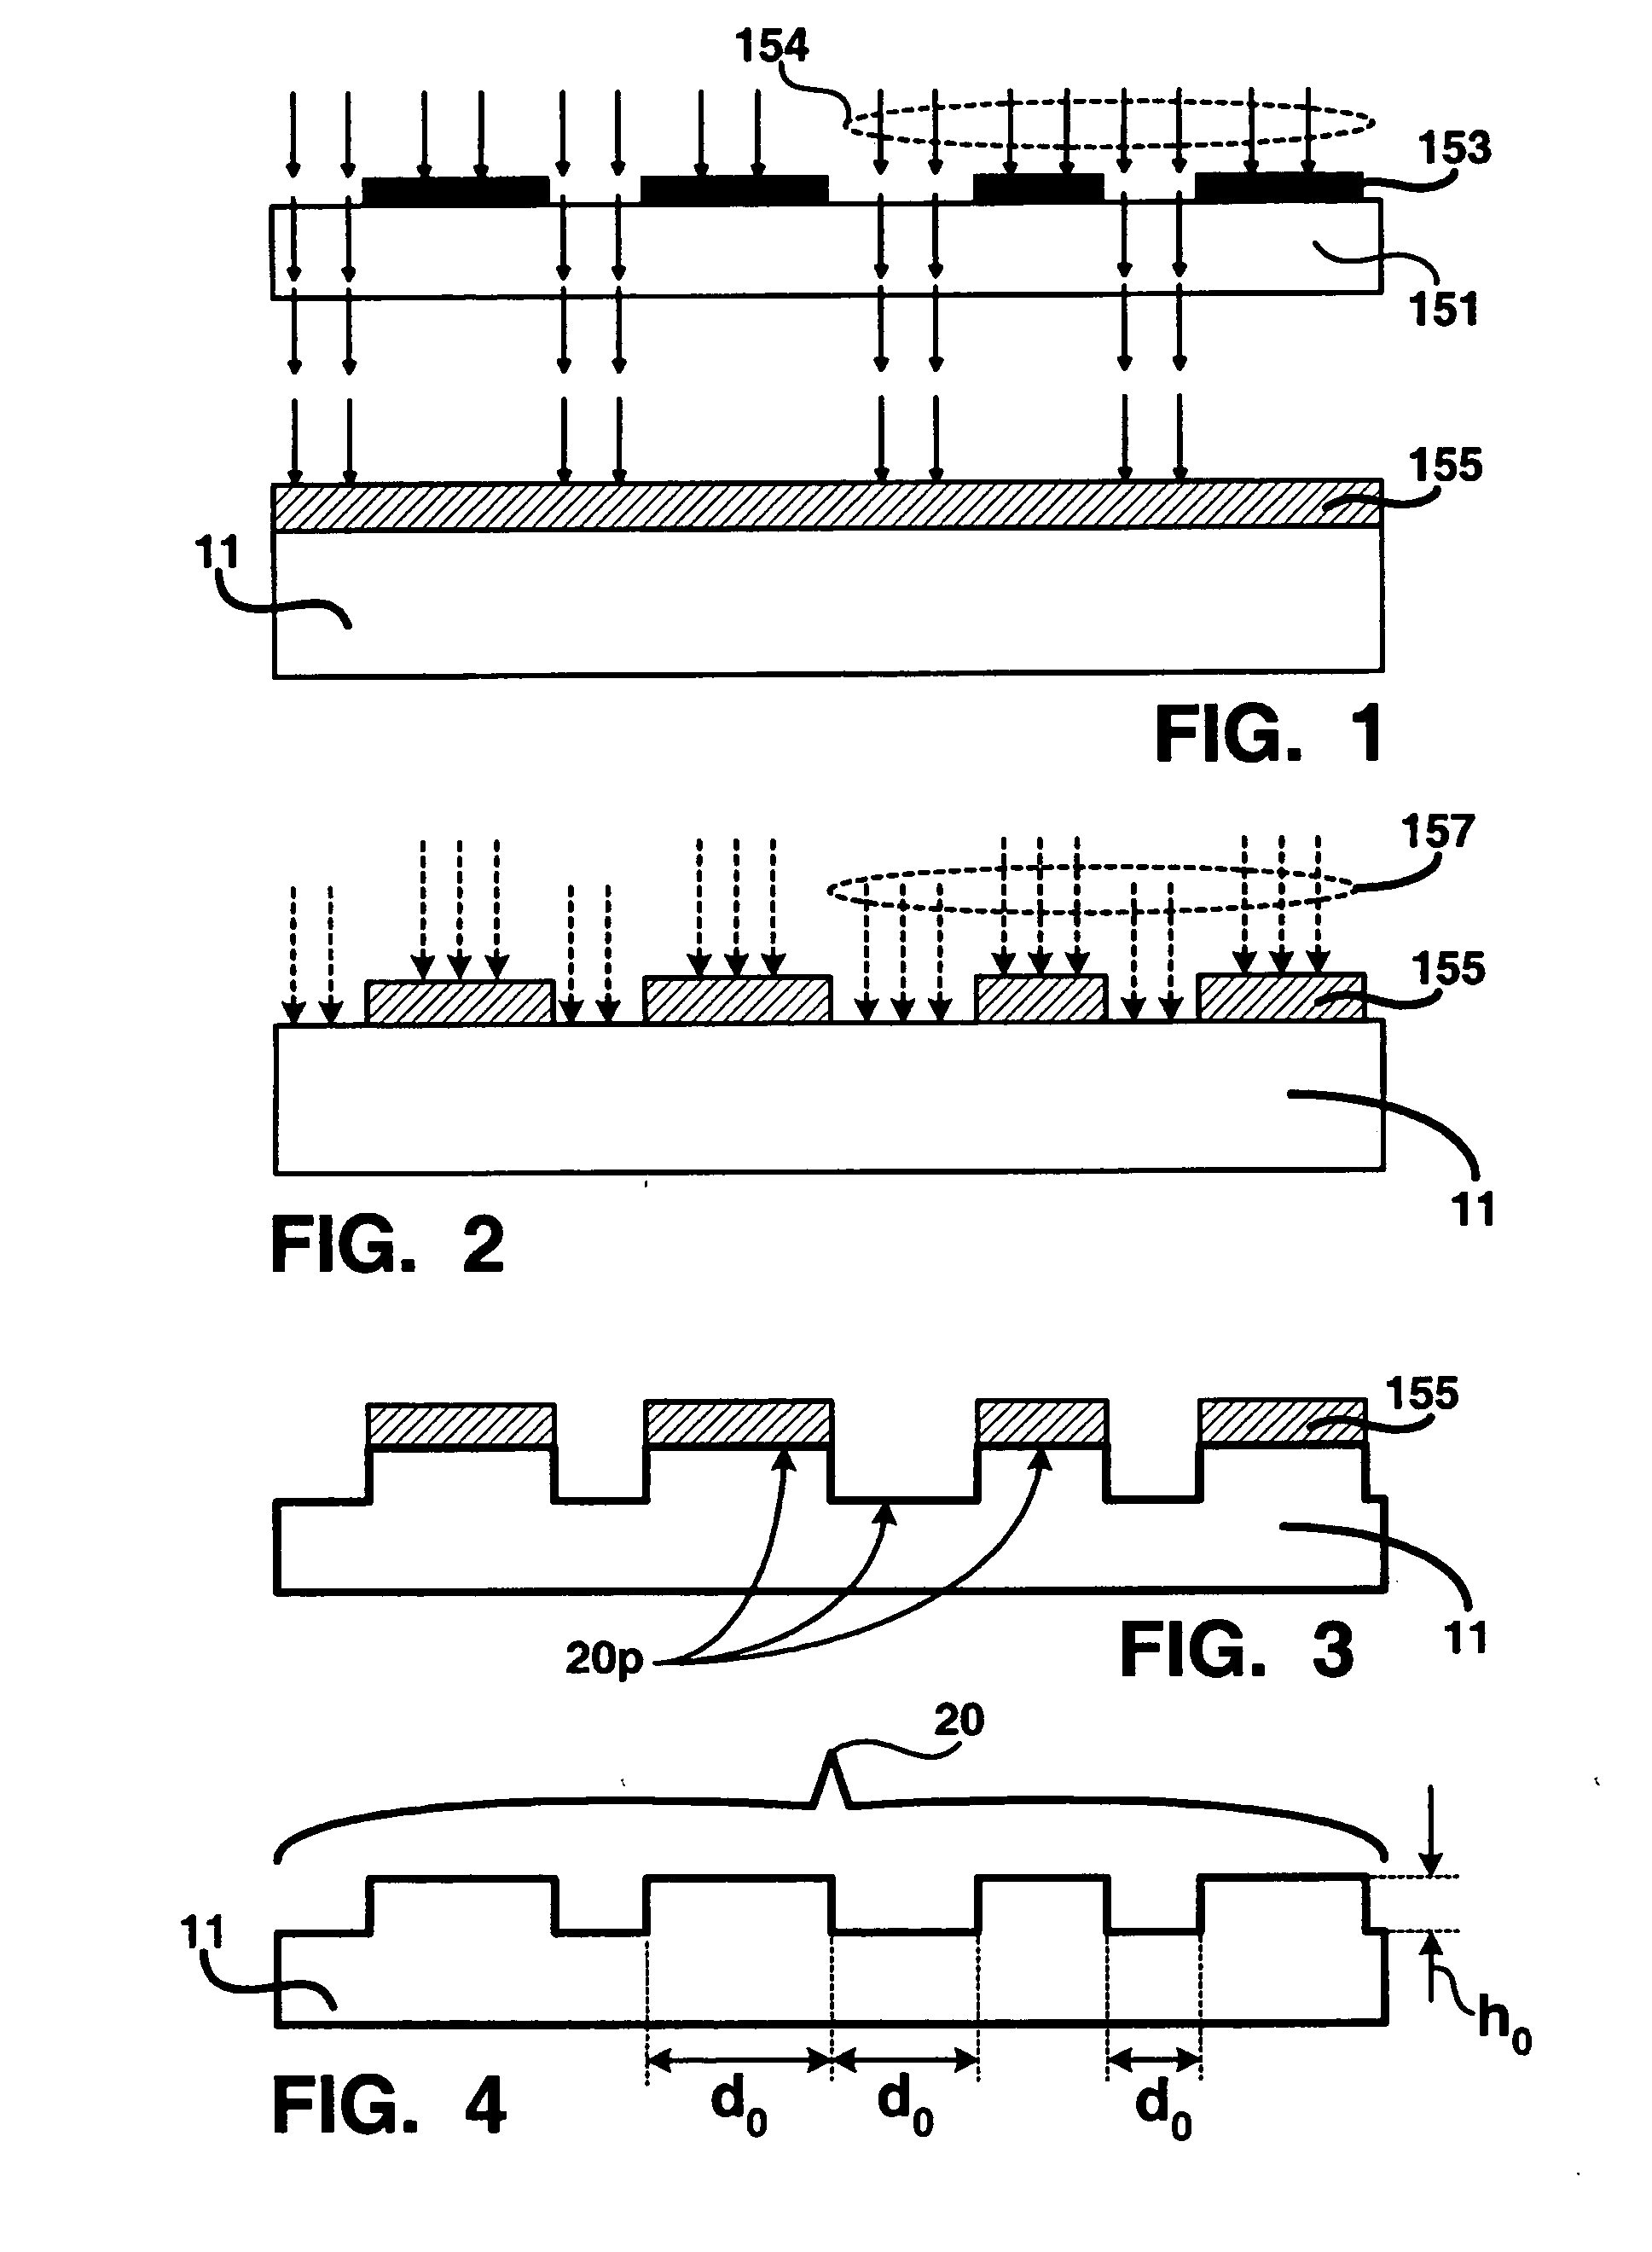 Apparatus for embossing a flexible substrate with a pattern carried by an optically transparent compliant media